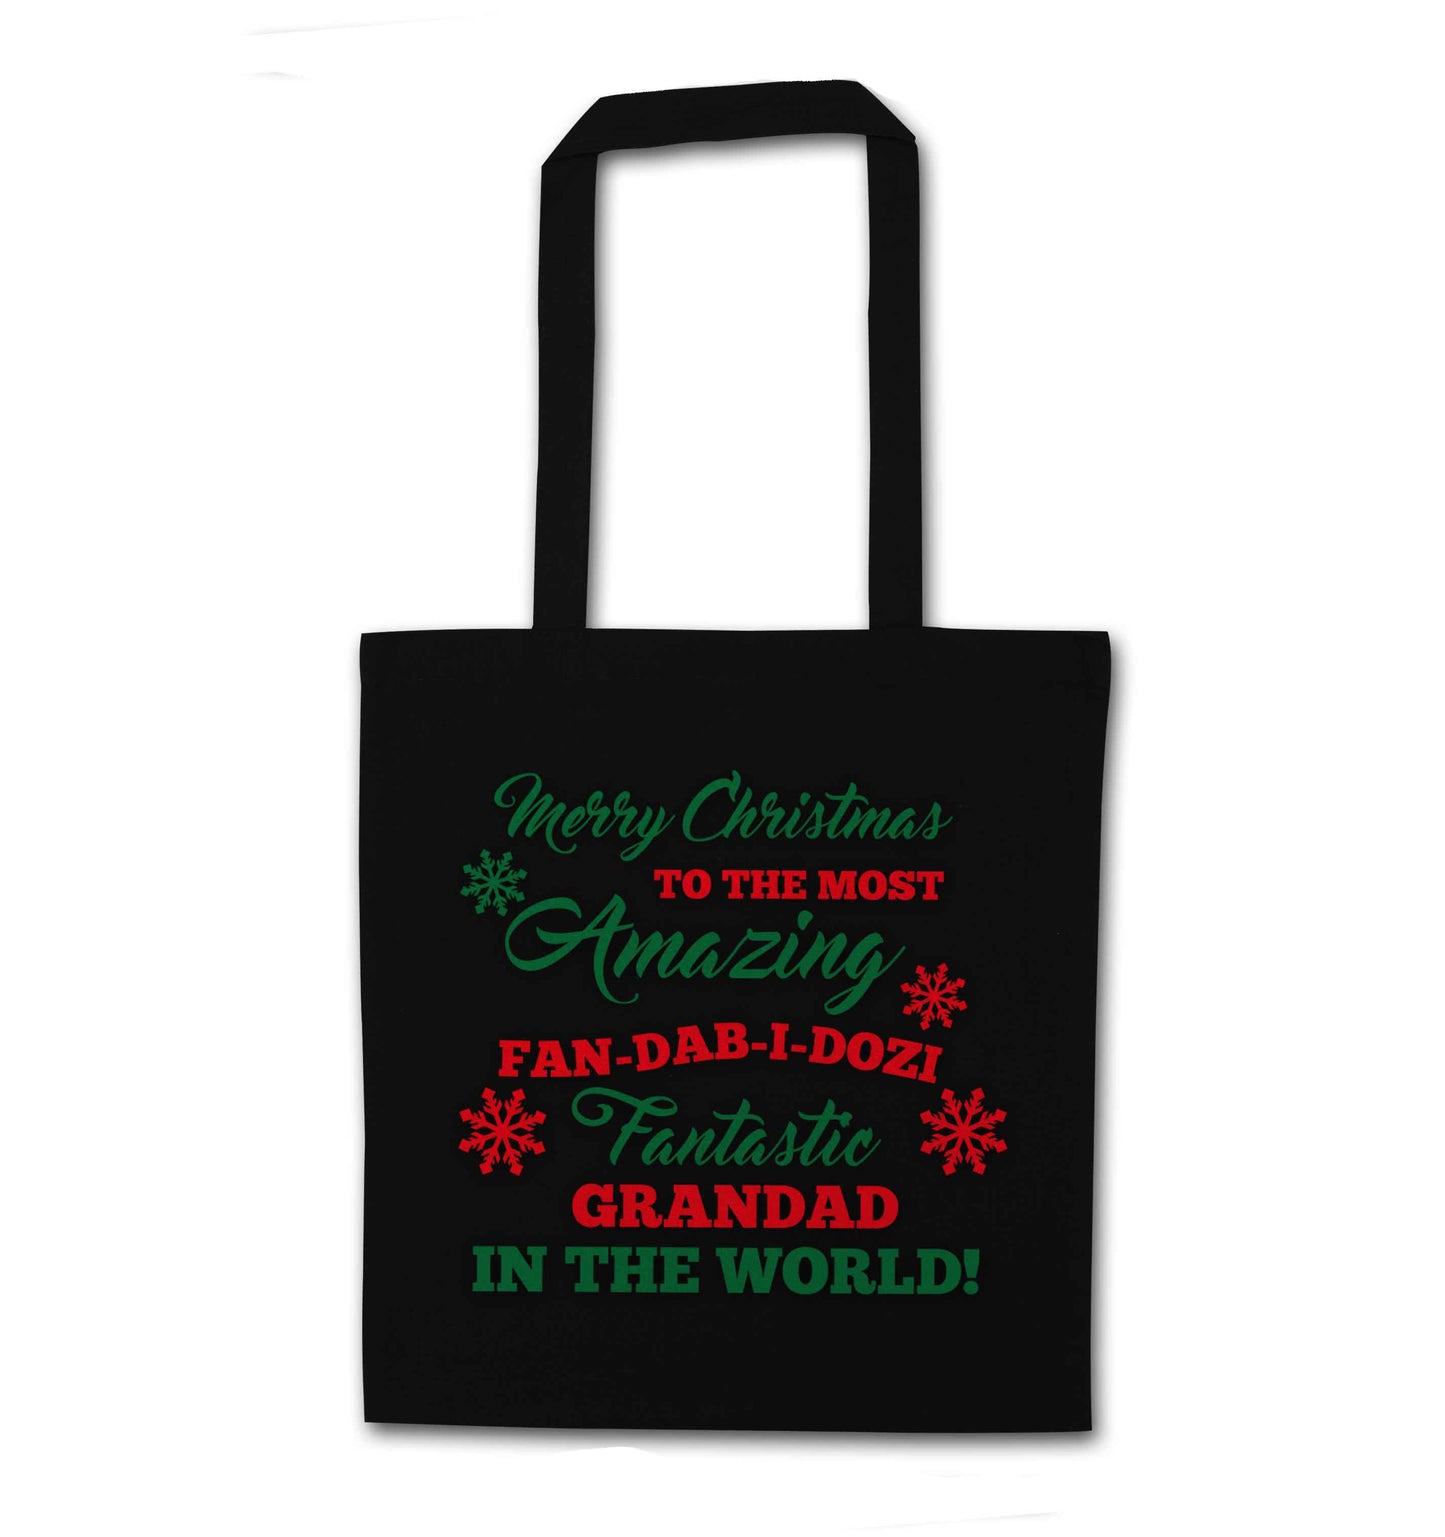 Merry Christmas to the most amazing fan-dab-i-dozi fantasic Grandad in the world black tote bag